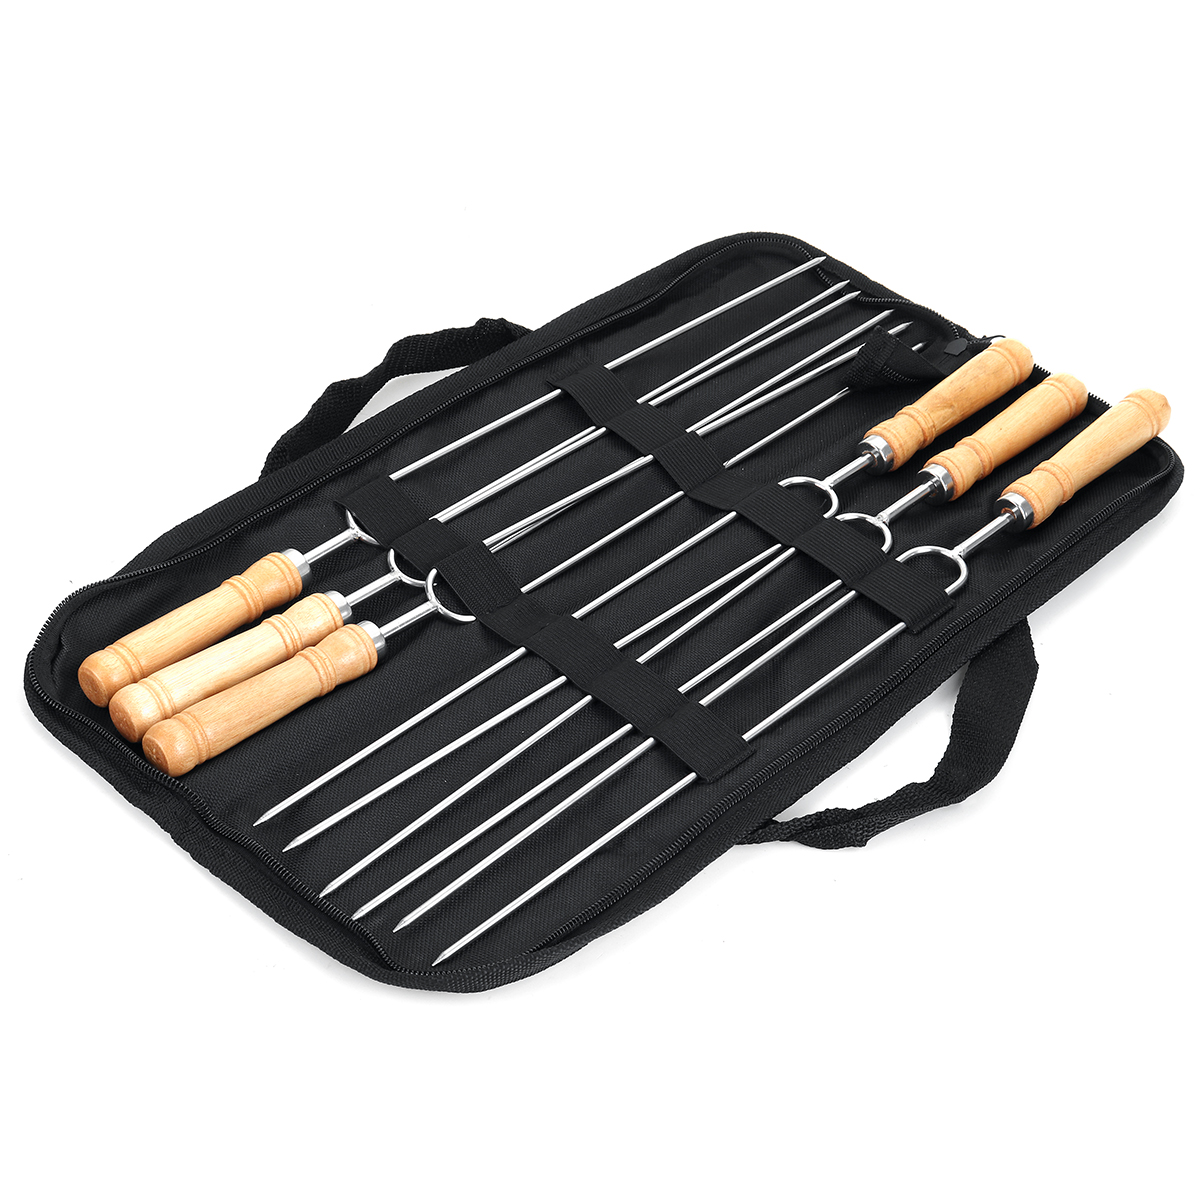 6PCSSet-Stainless-Steel-Wire-BBQ-Skewers-Wood-Handle-Grill-Roasting-Sticks-Outdoor-Camping-BBQ-Tool-1806341-2